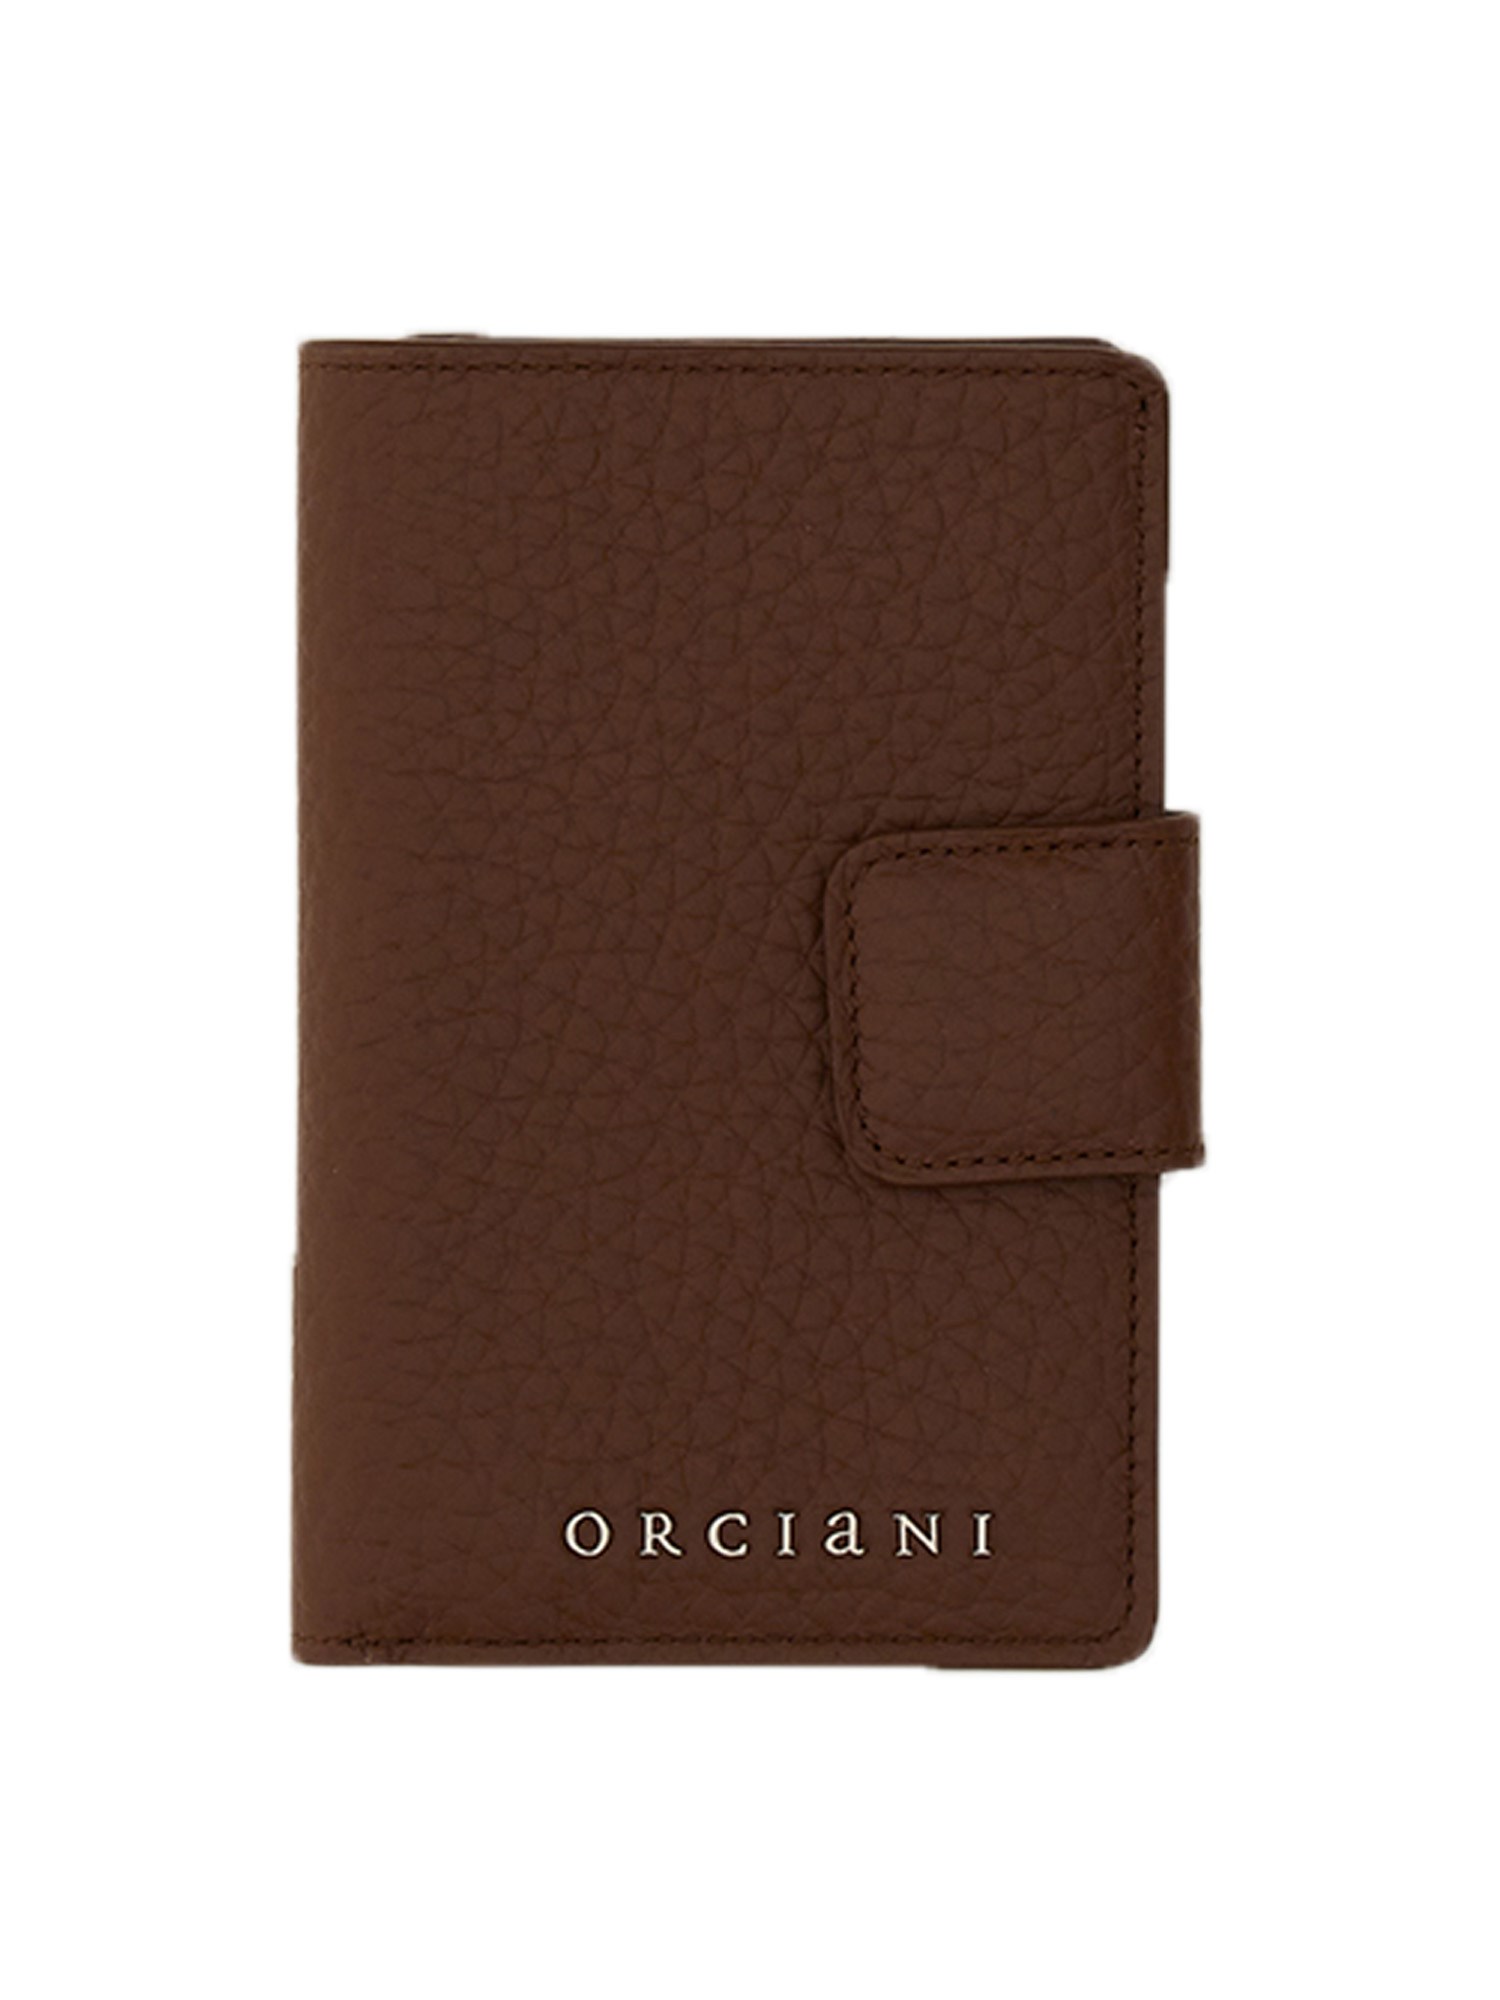 Orciani orciani soft wallet